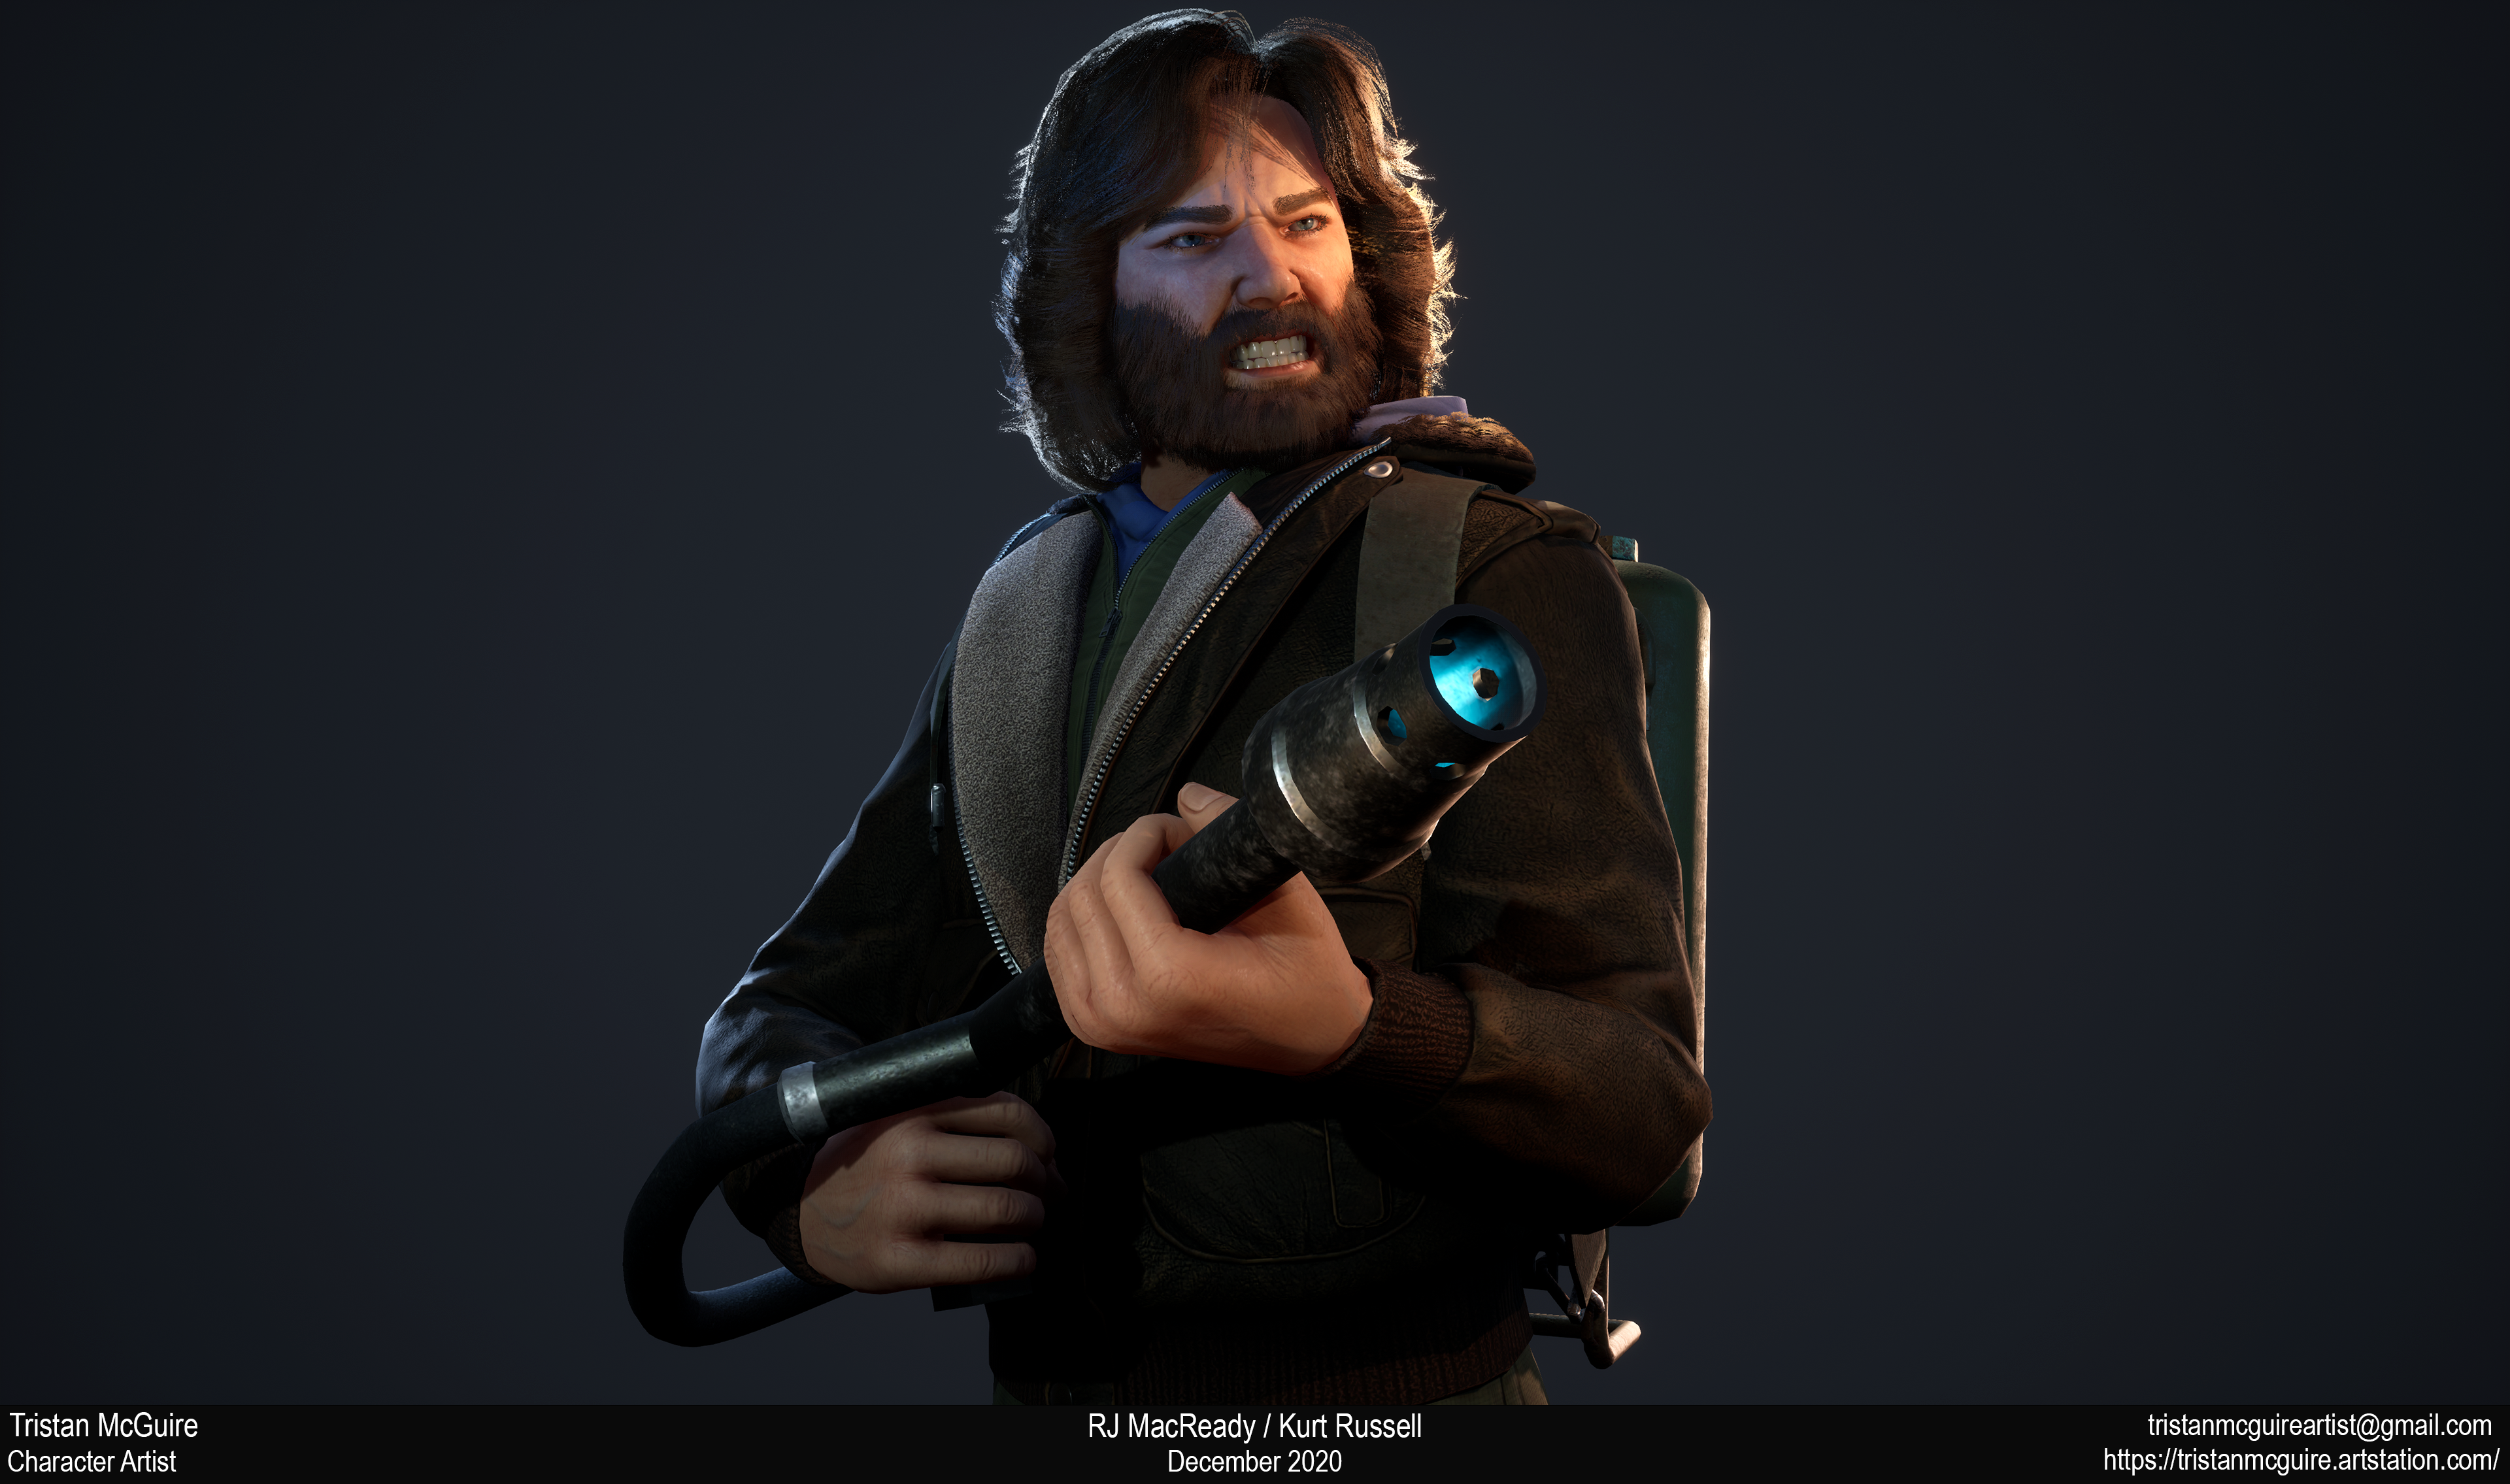 RJ MacReady designed by computer games student Tristan McGuire 